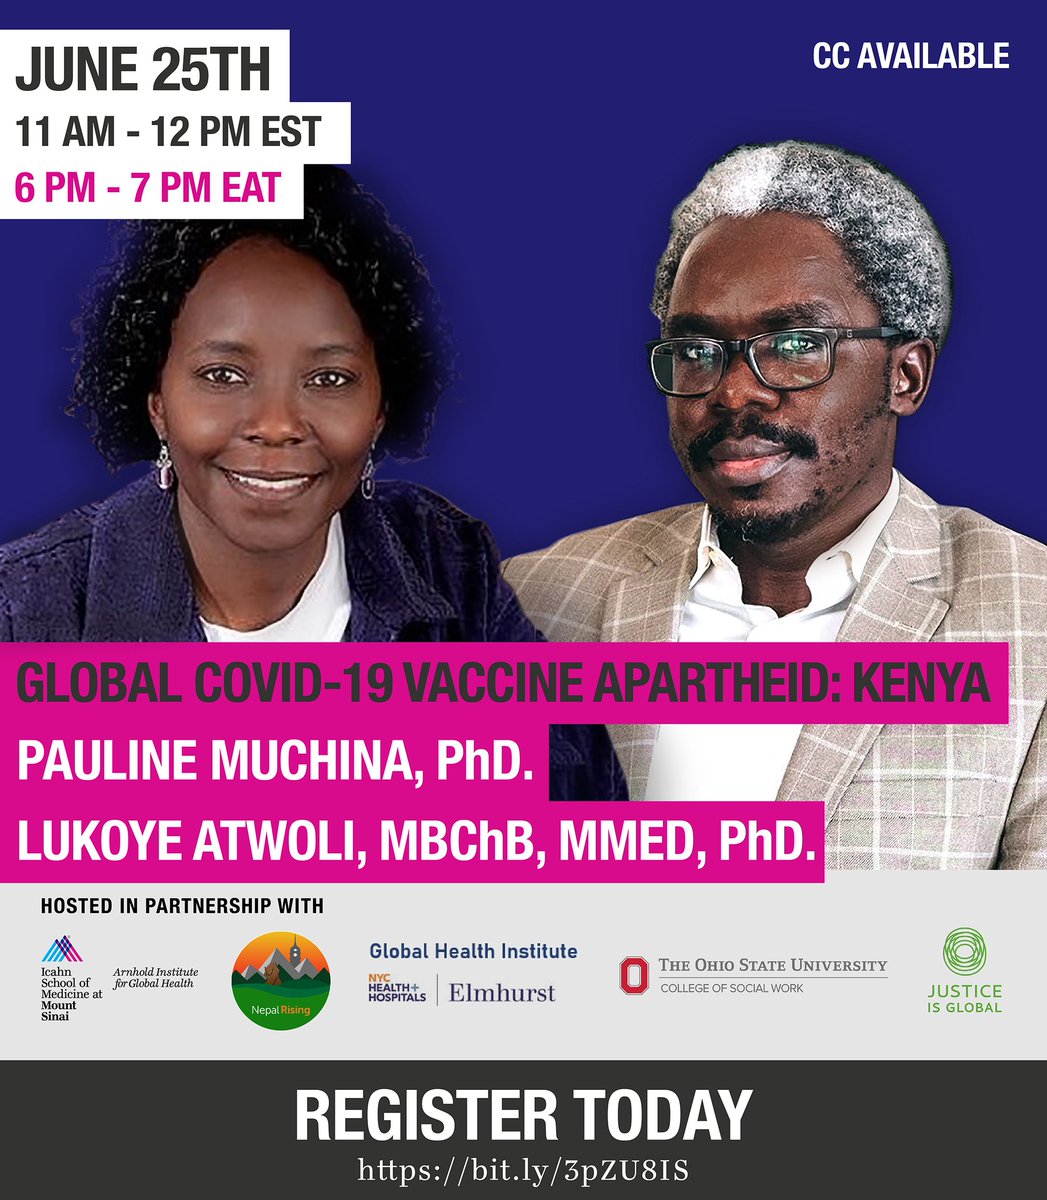 TODAY - Join for this important dialogue about the urgent need to expand global vaccine access to Kenya. 

Register now!: 
lnkd.in/d8FcUX6

@osucsw @NYCHealthSystem @justiceisglobal @NepalRising  #vaccineequity #globalhealth #WhatMustWeDoNow